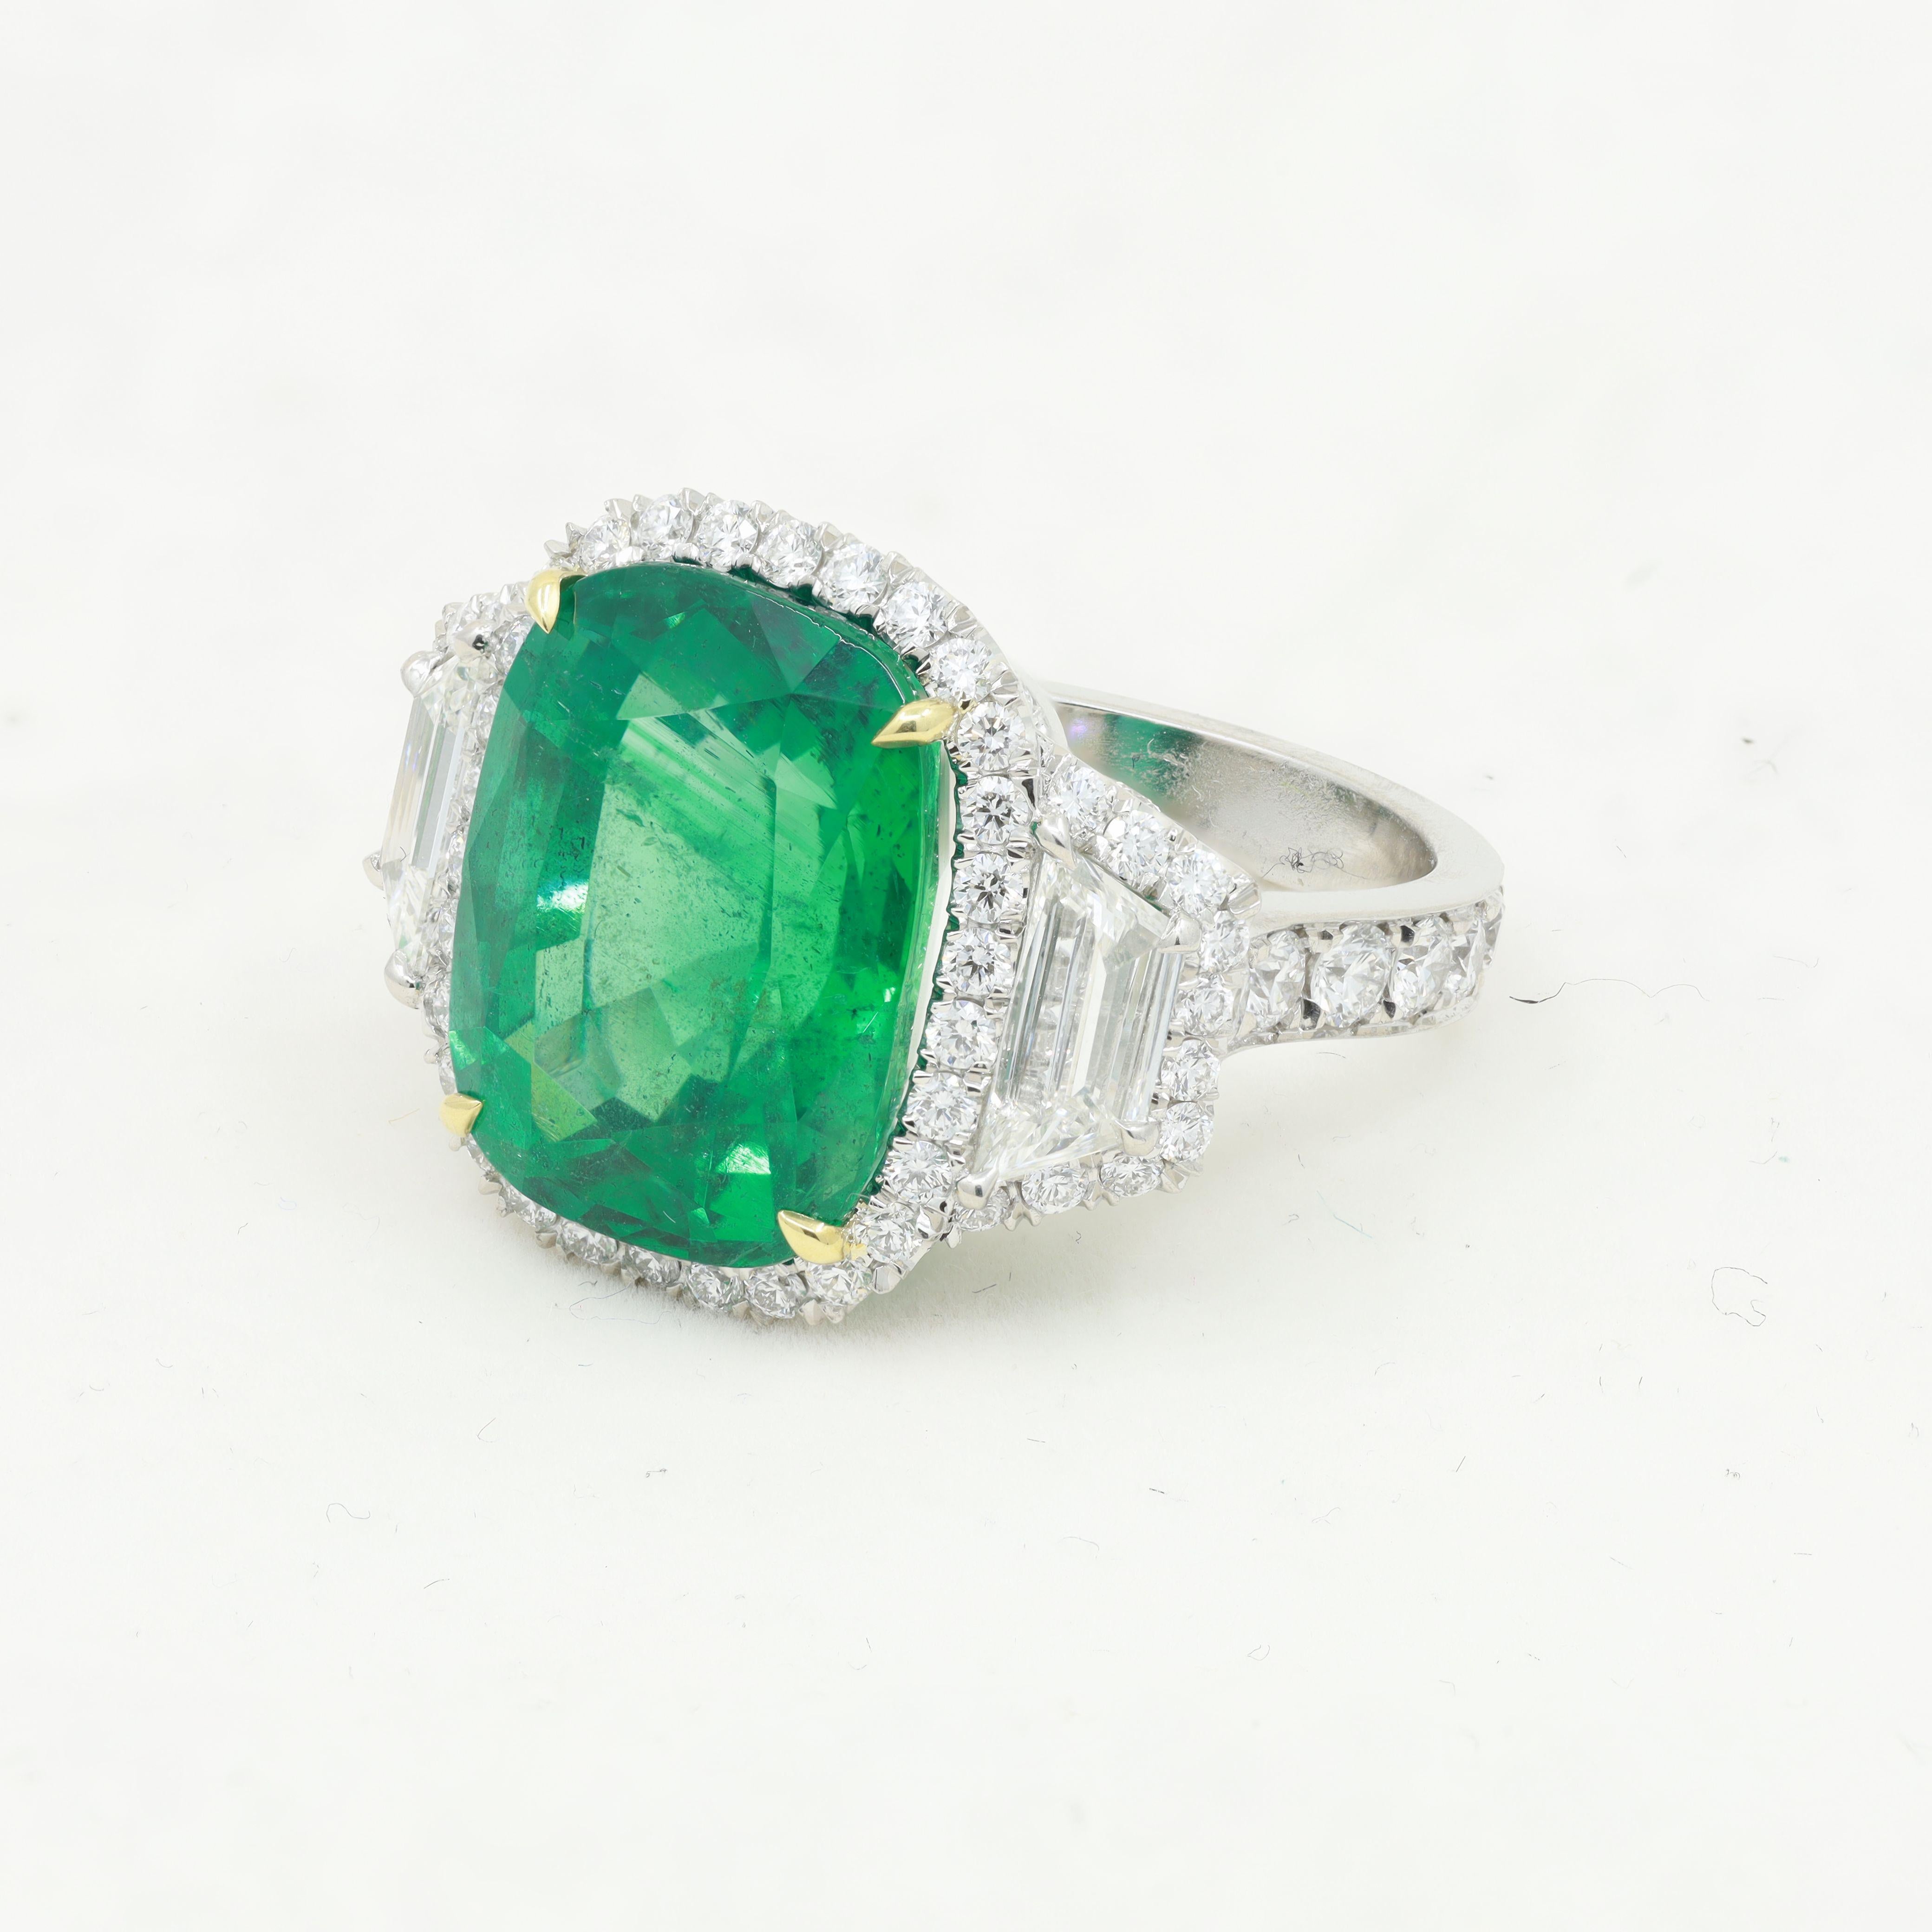 Modern Diana M. Platinum and 18 kt yellow gold emerald and diamond ring featuring 11.22 For Sale